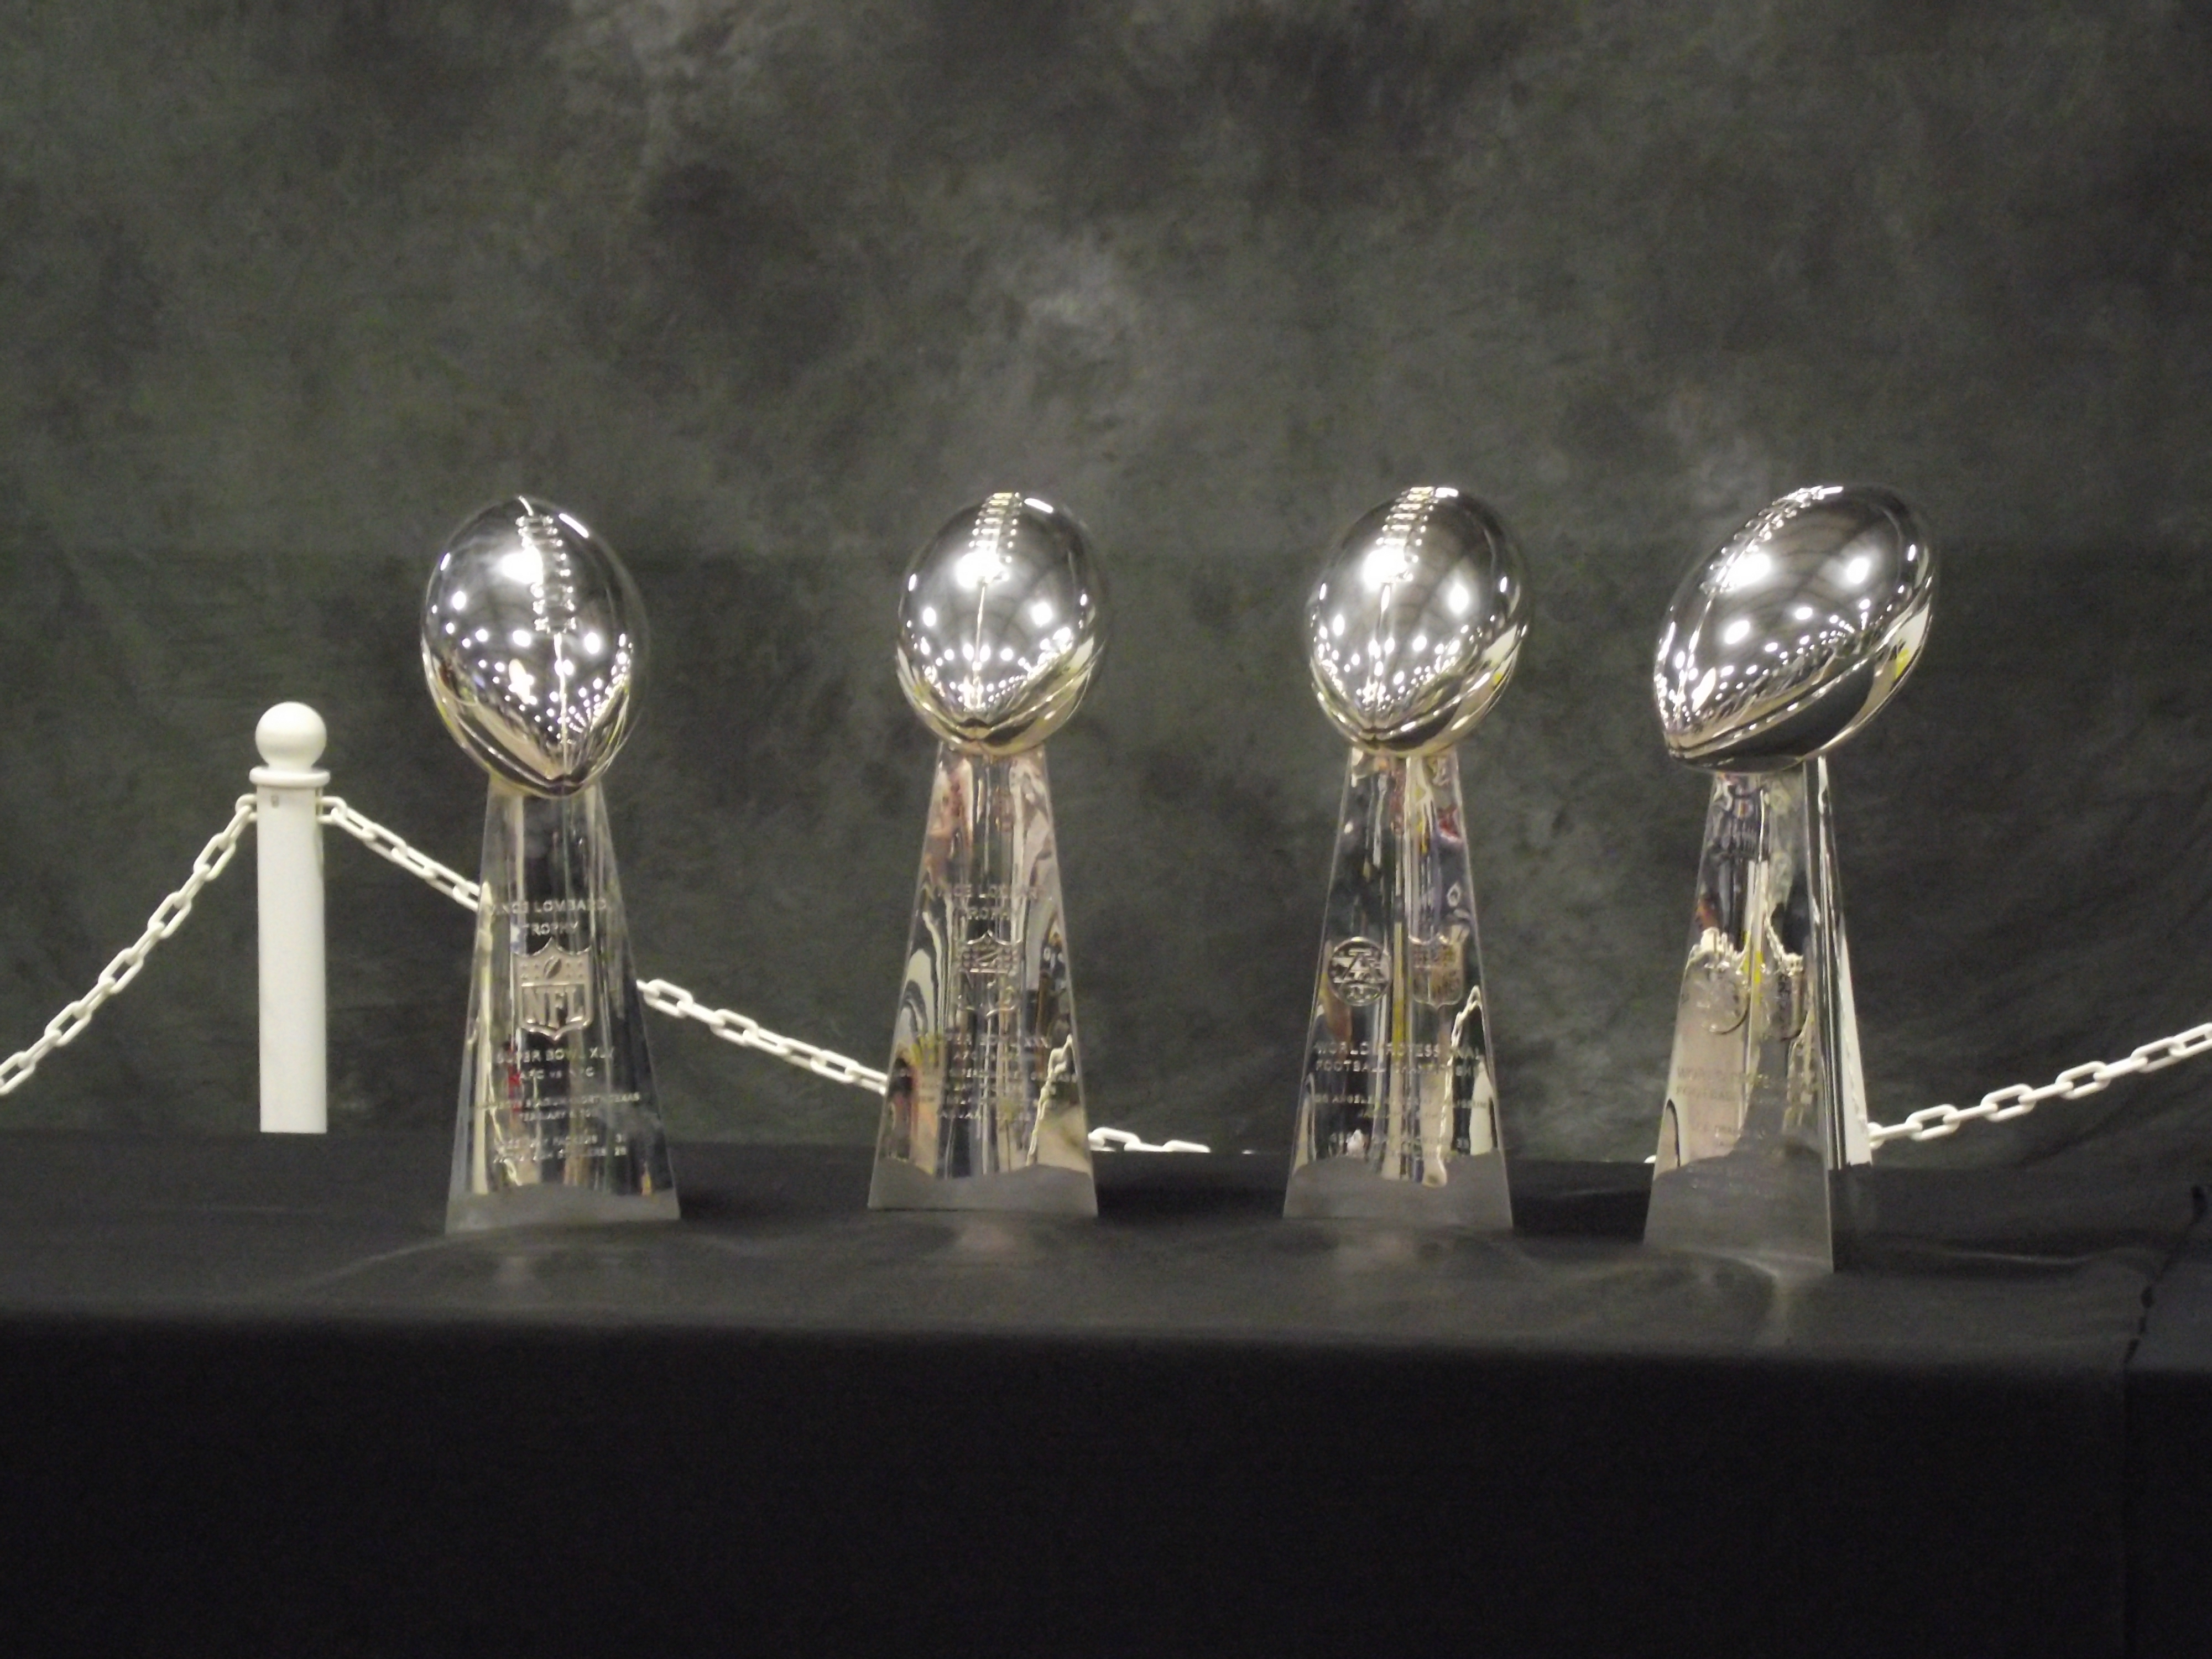 The Green Bay Packers Four Super Bowl Trophies Packer Focus